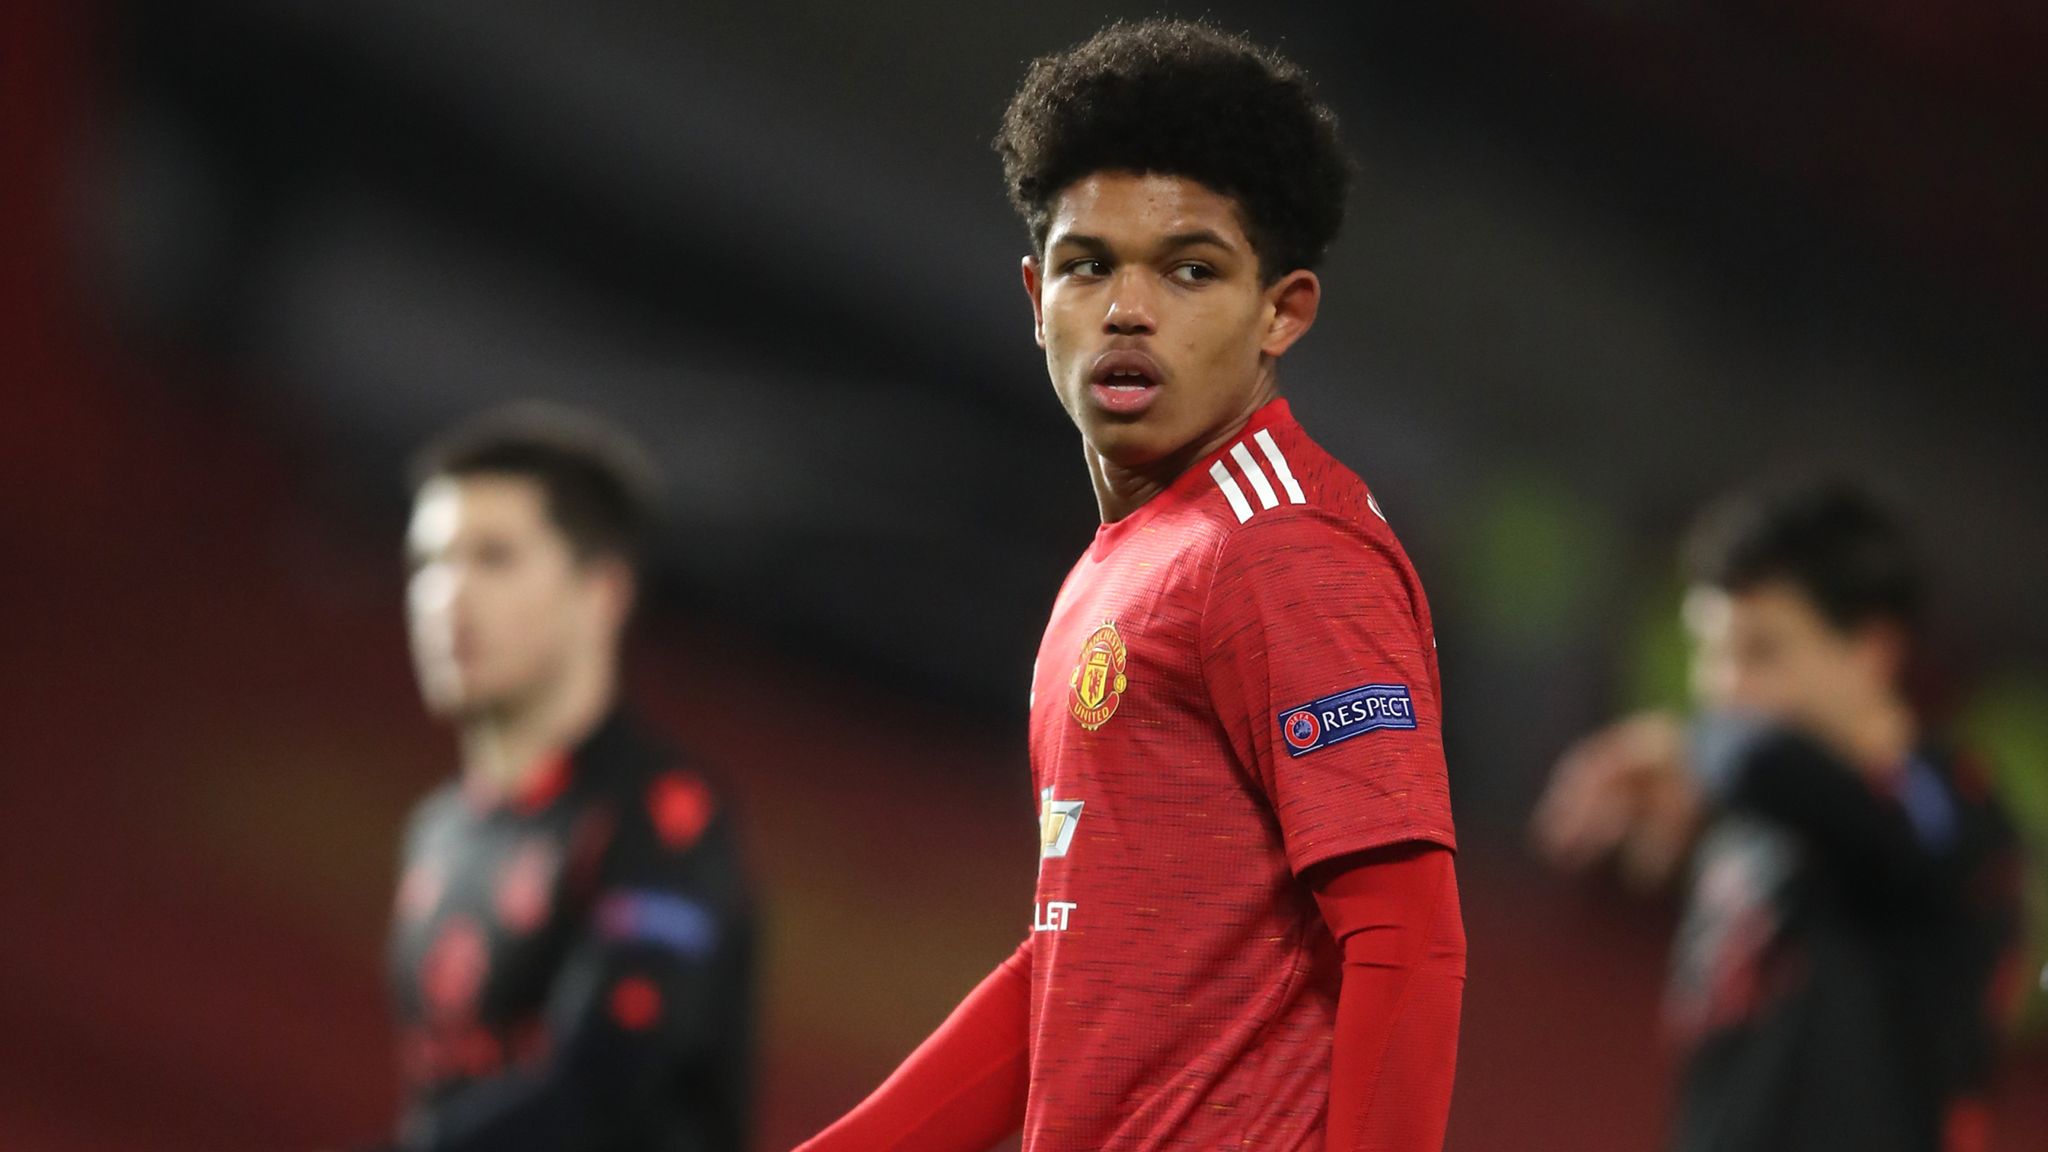 Shola Shoretire: Ole Gunnar Solskjaer says 17-year-old will play in front of Man Utd fans | Football News | Sky Sports